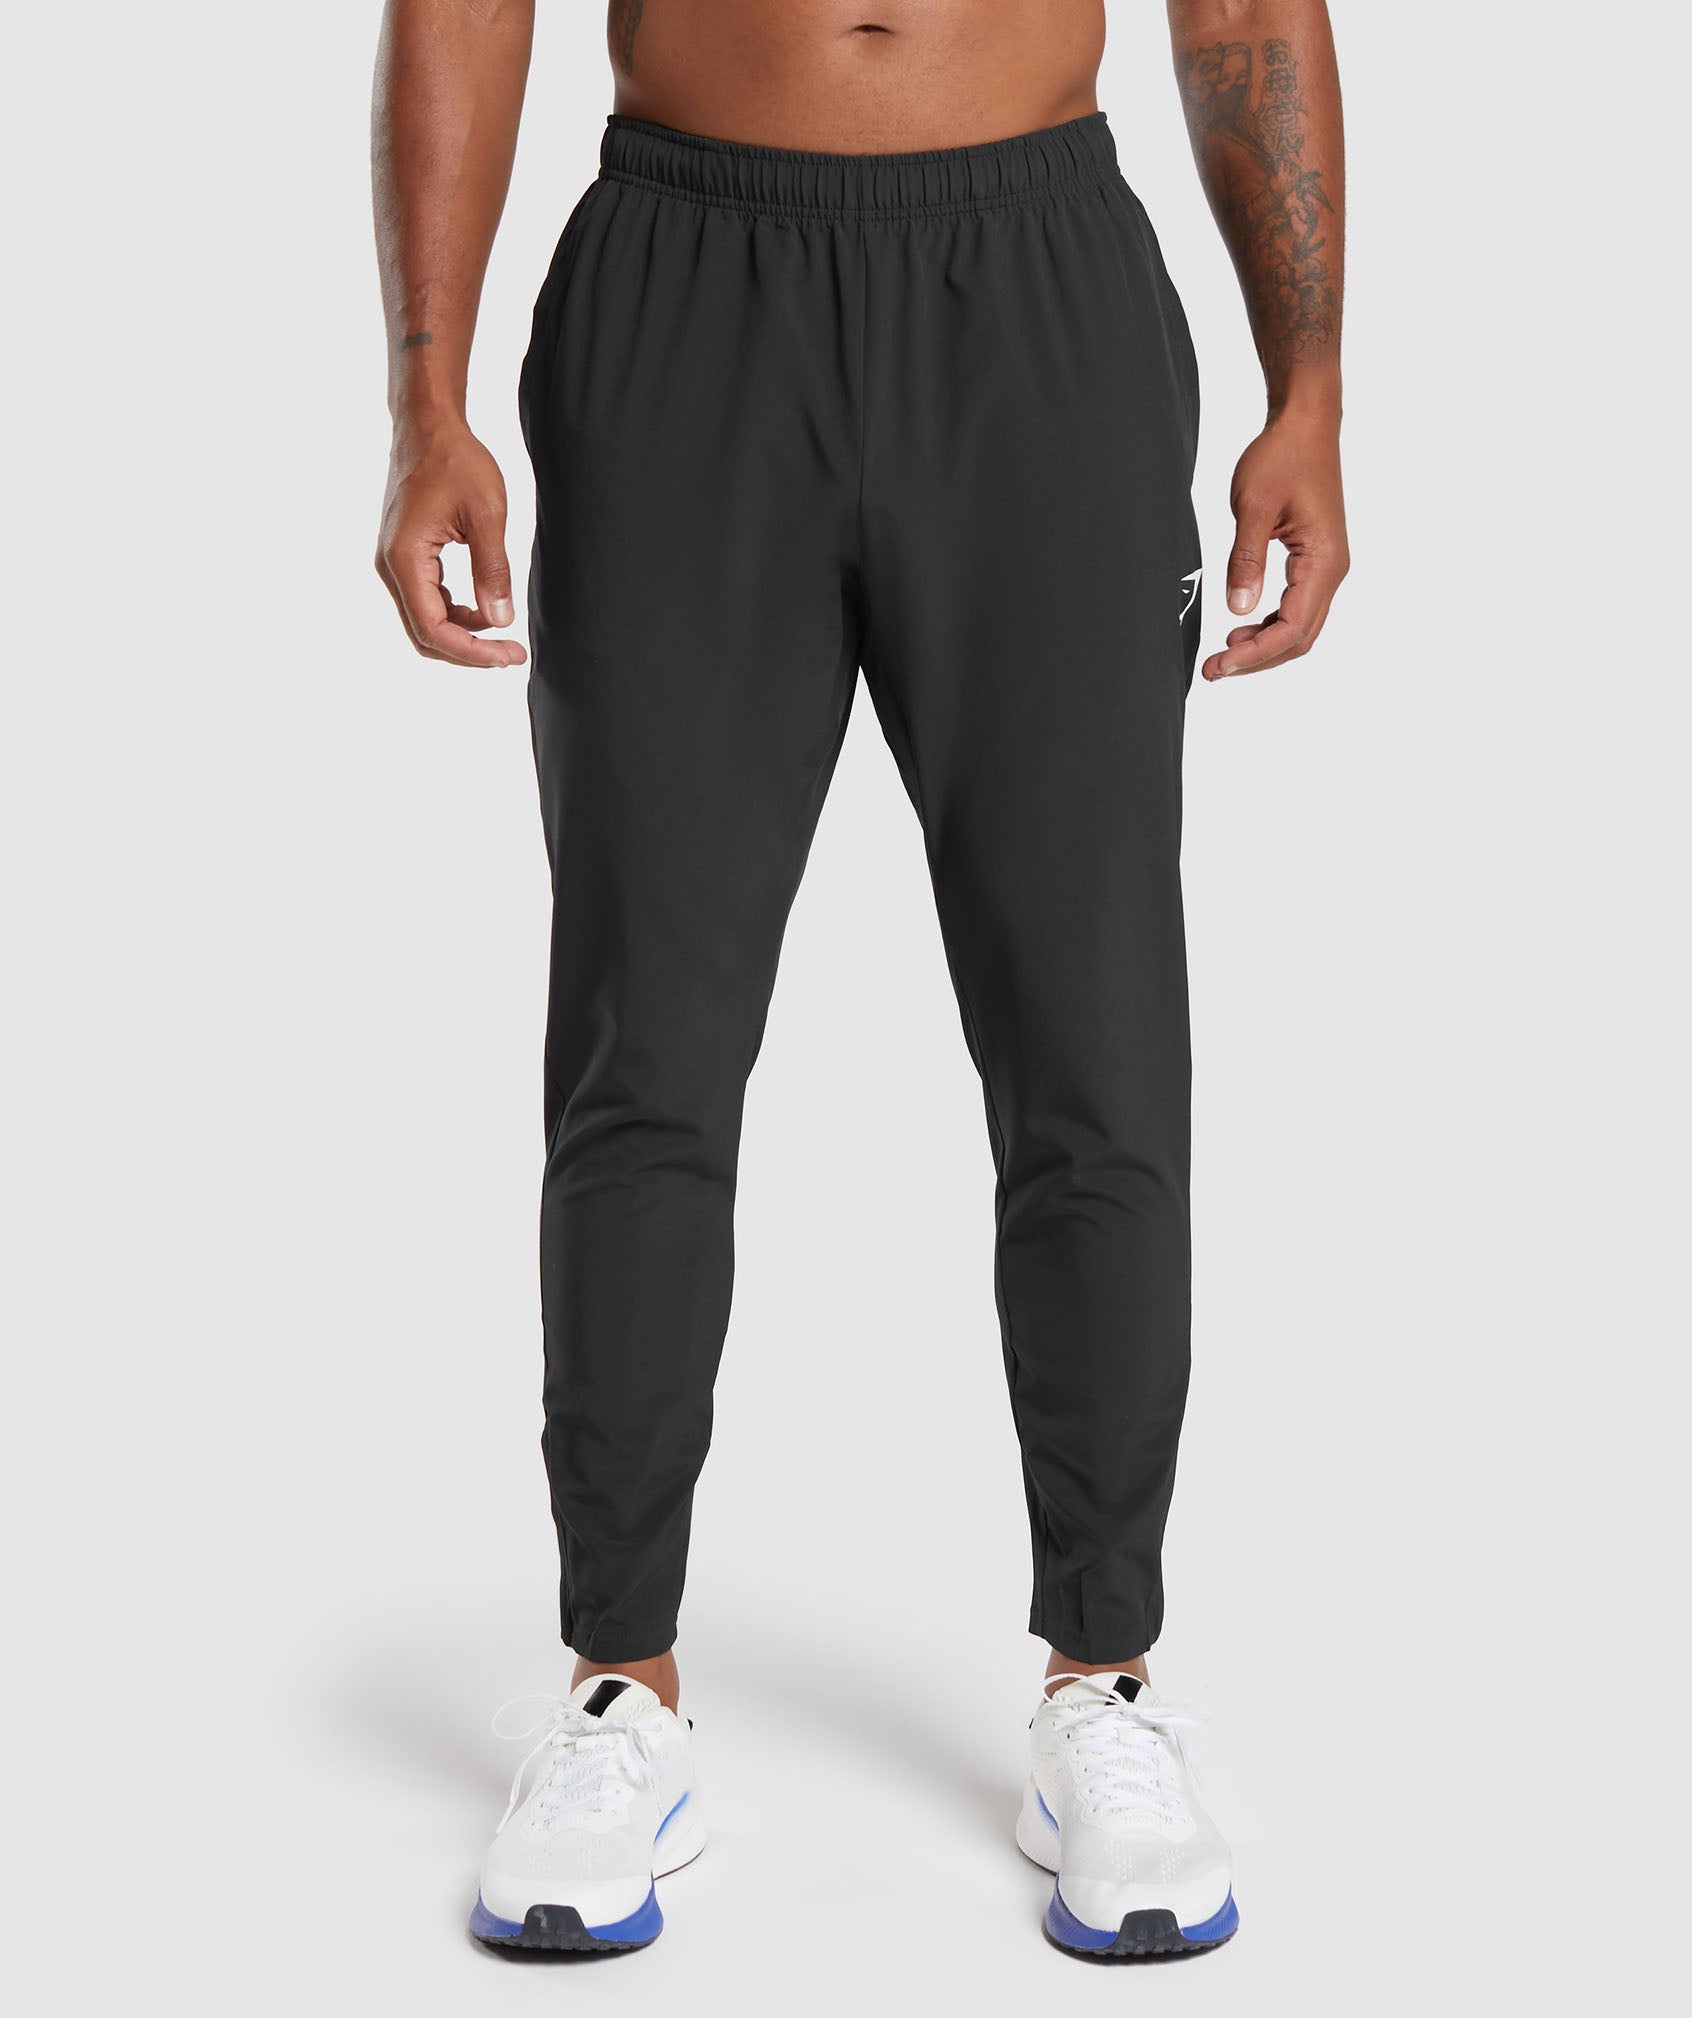 Arrival Jogger in {{variantColor} is out of stock